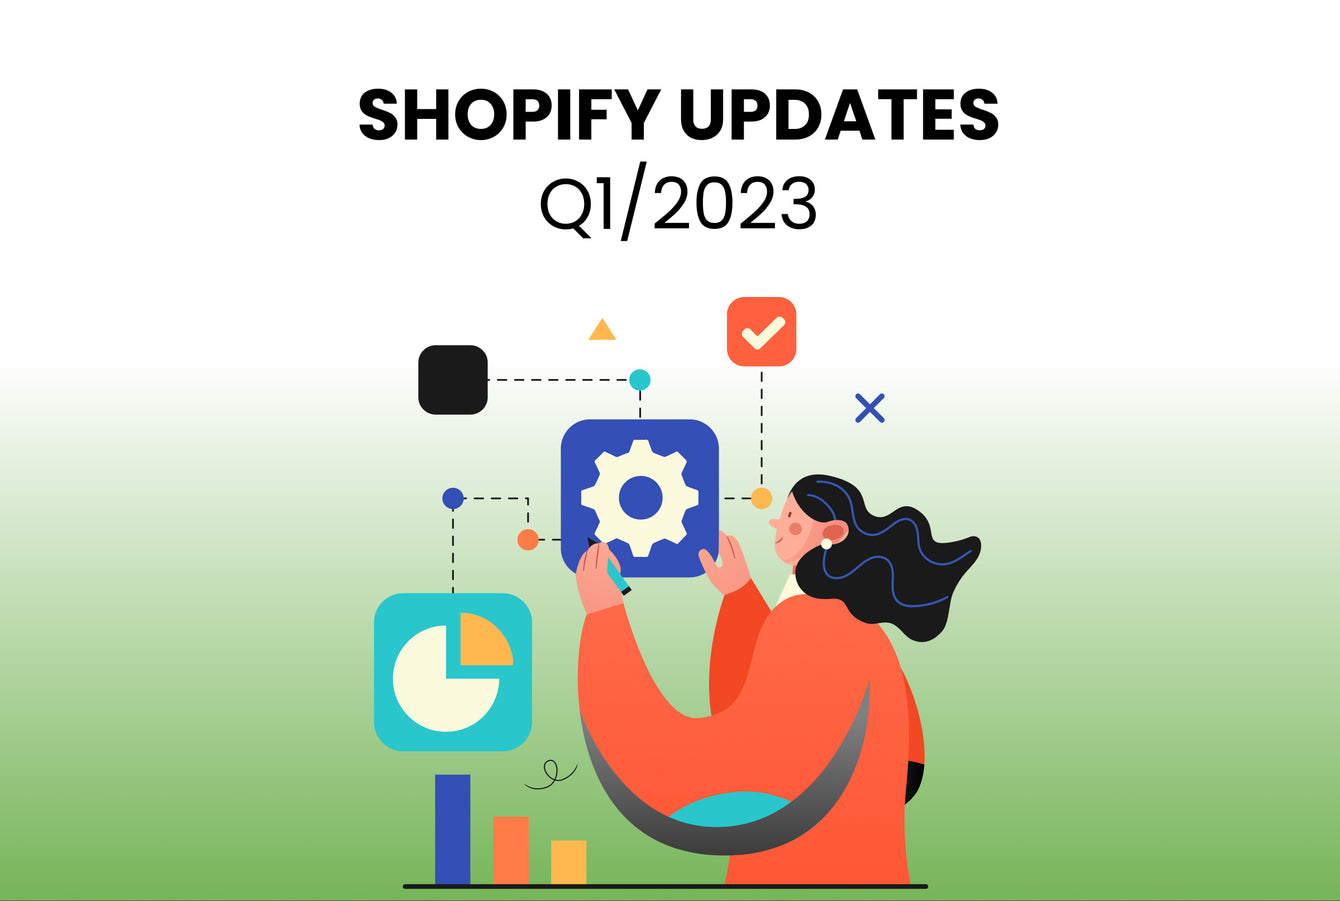 Shopify Updates: A Roundup Of The Biggest News & Updates To The Platform So Far